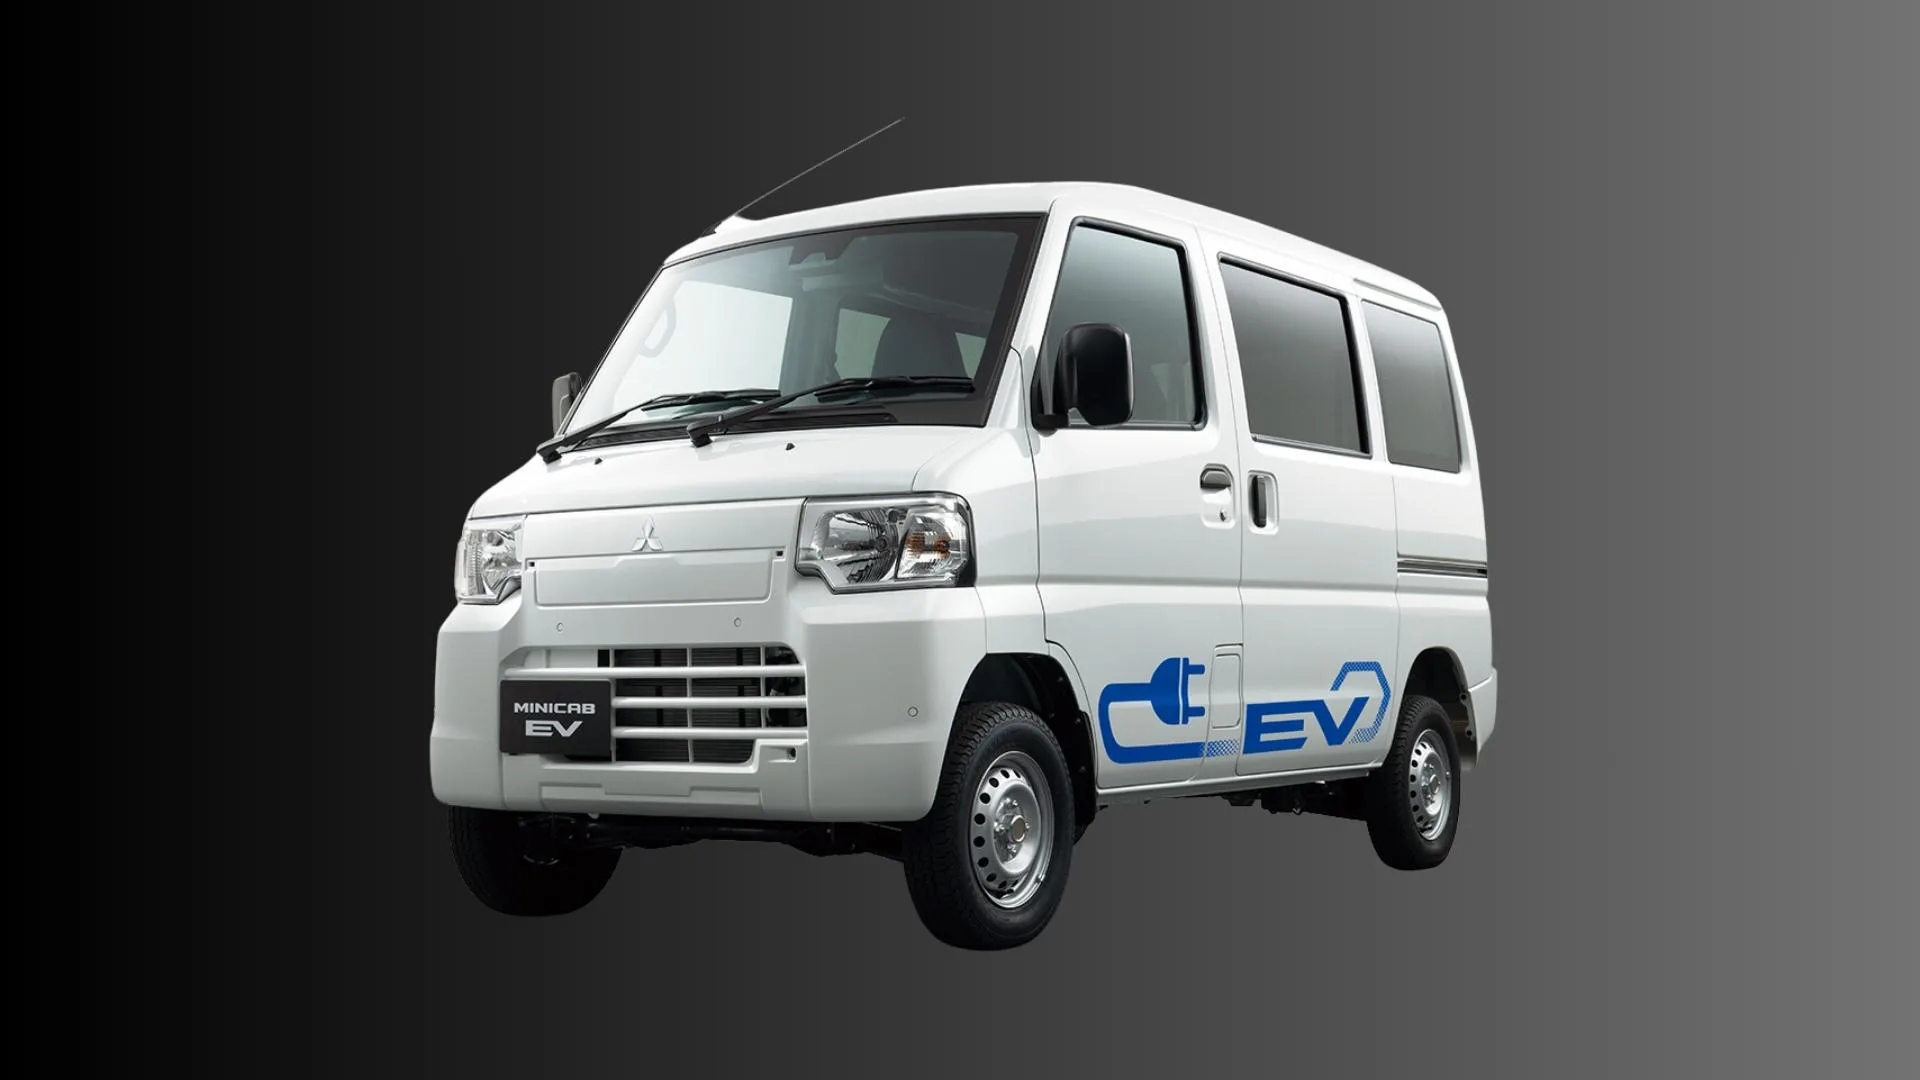 Meet Mitsubishi's Minicab EV: An efficient electric commercial vehicle with extended range and advanced safety